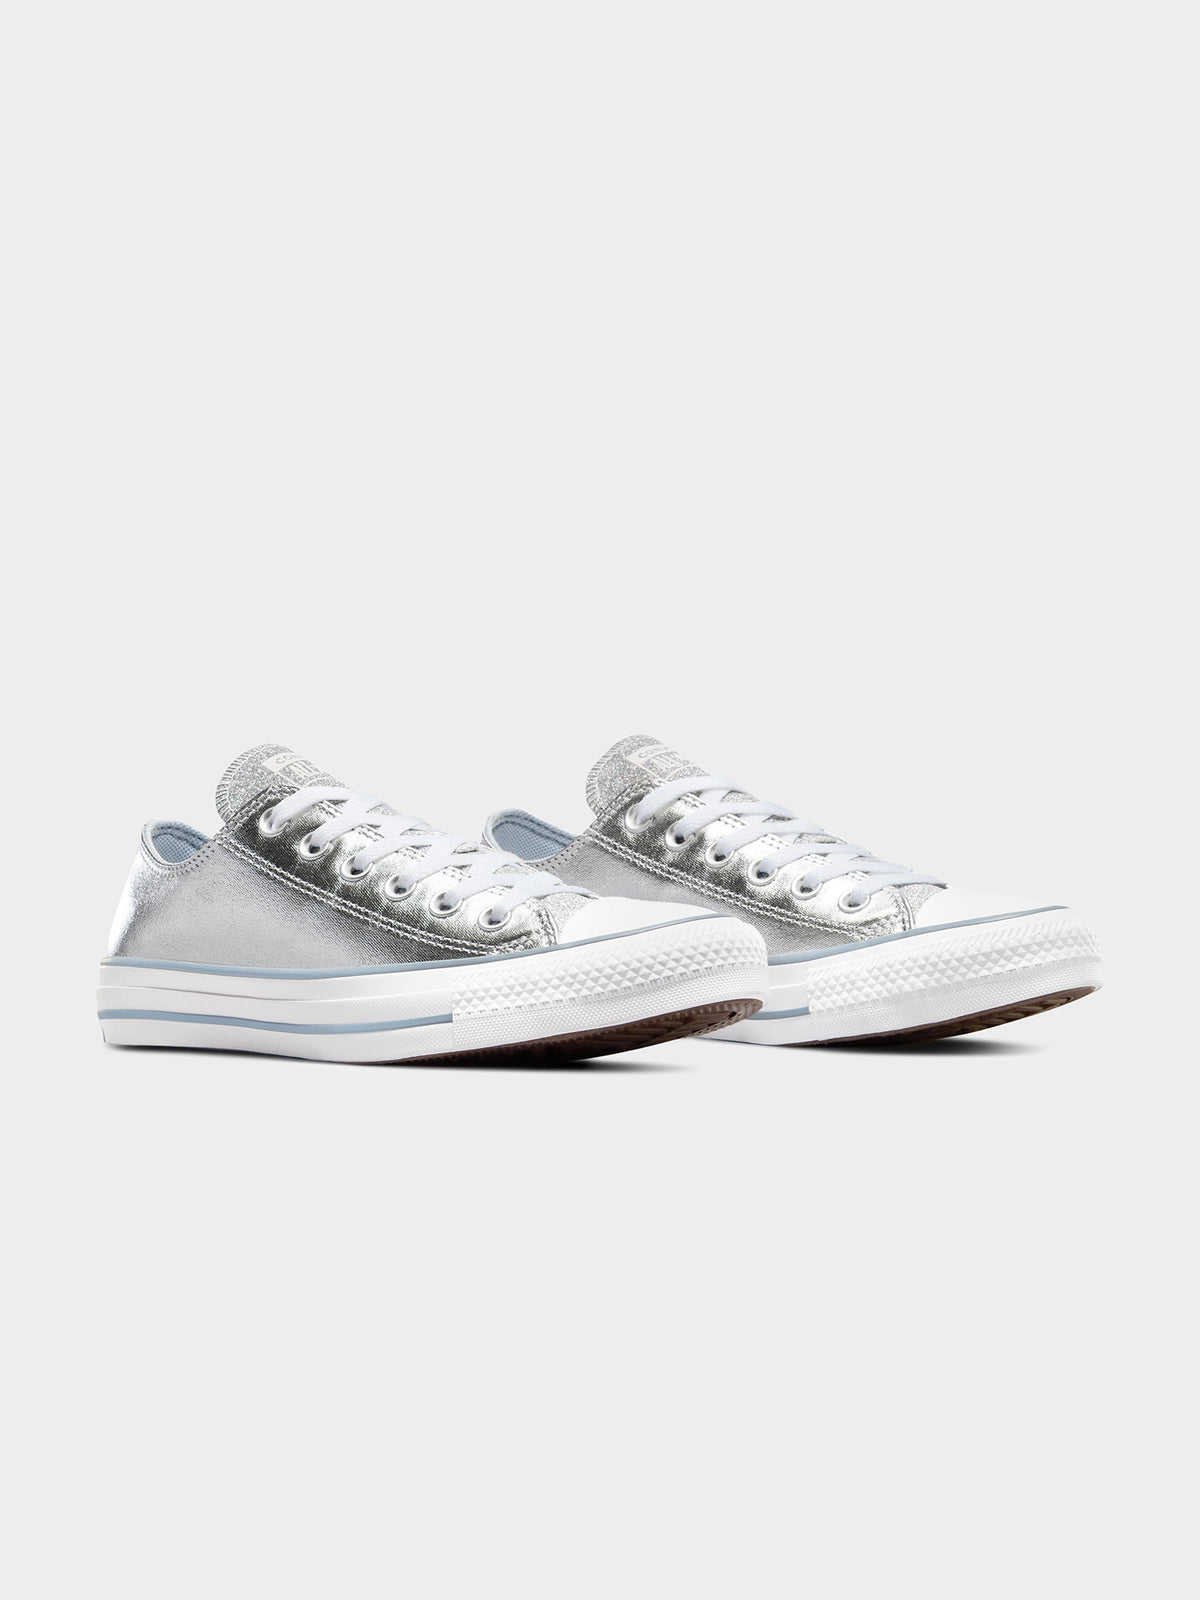 Unisex Chuck Taylor All Star Sparkle Party Low Top Sneakers in Metallic Granite